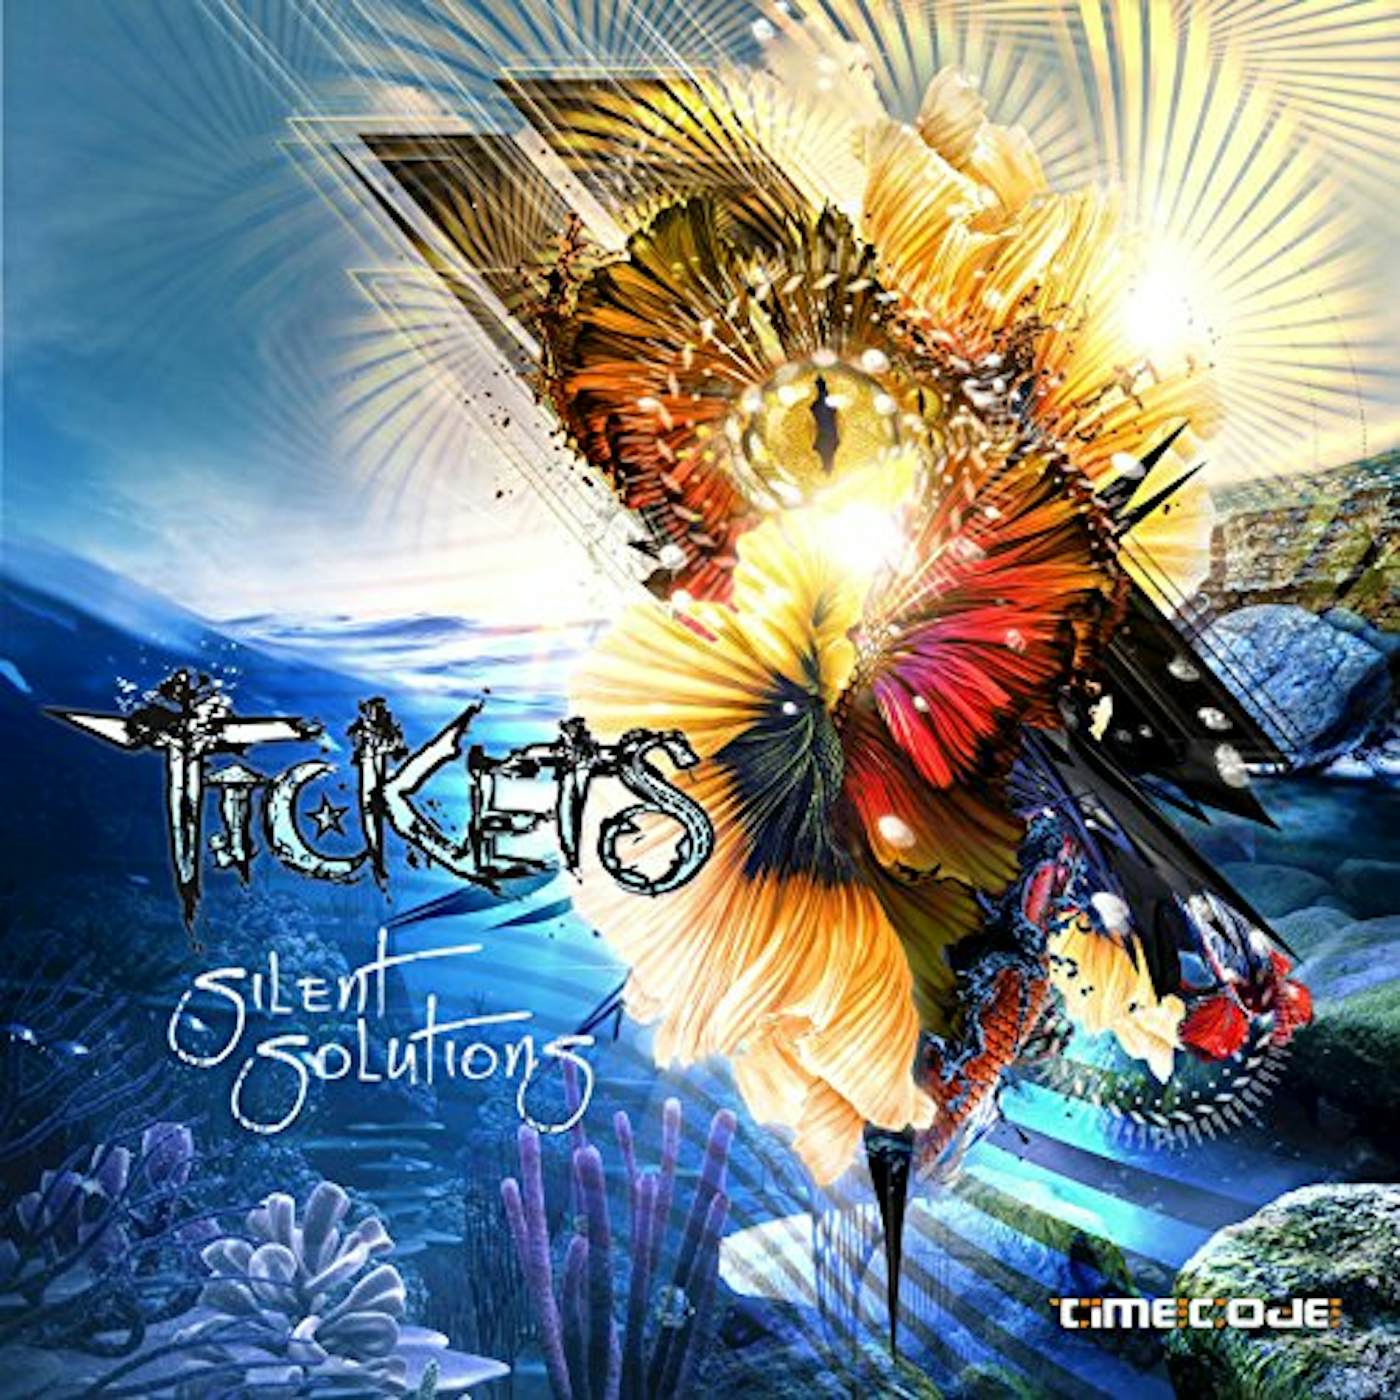 Tickets SILENT SOLUTIONS CD